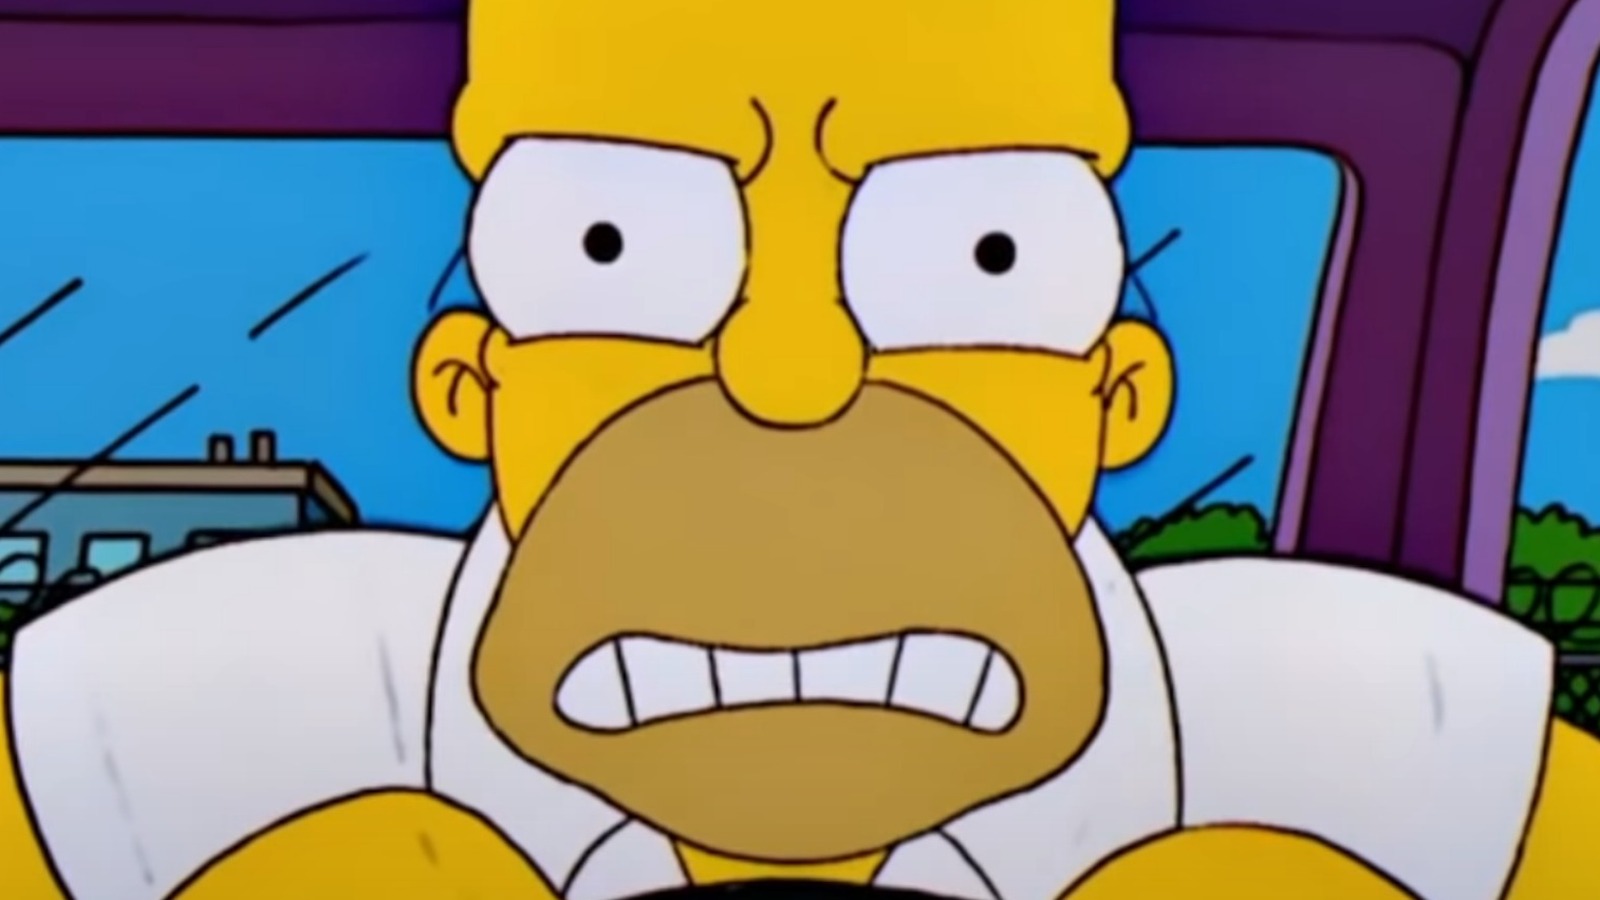 The Simpsons Fans Just Can't Seem To Agree On Their Favorite Angry Homer  Moment